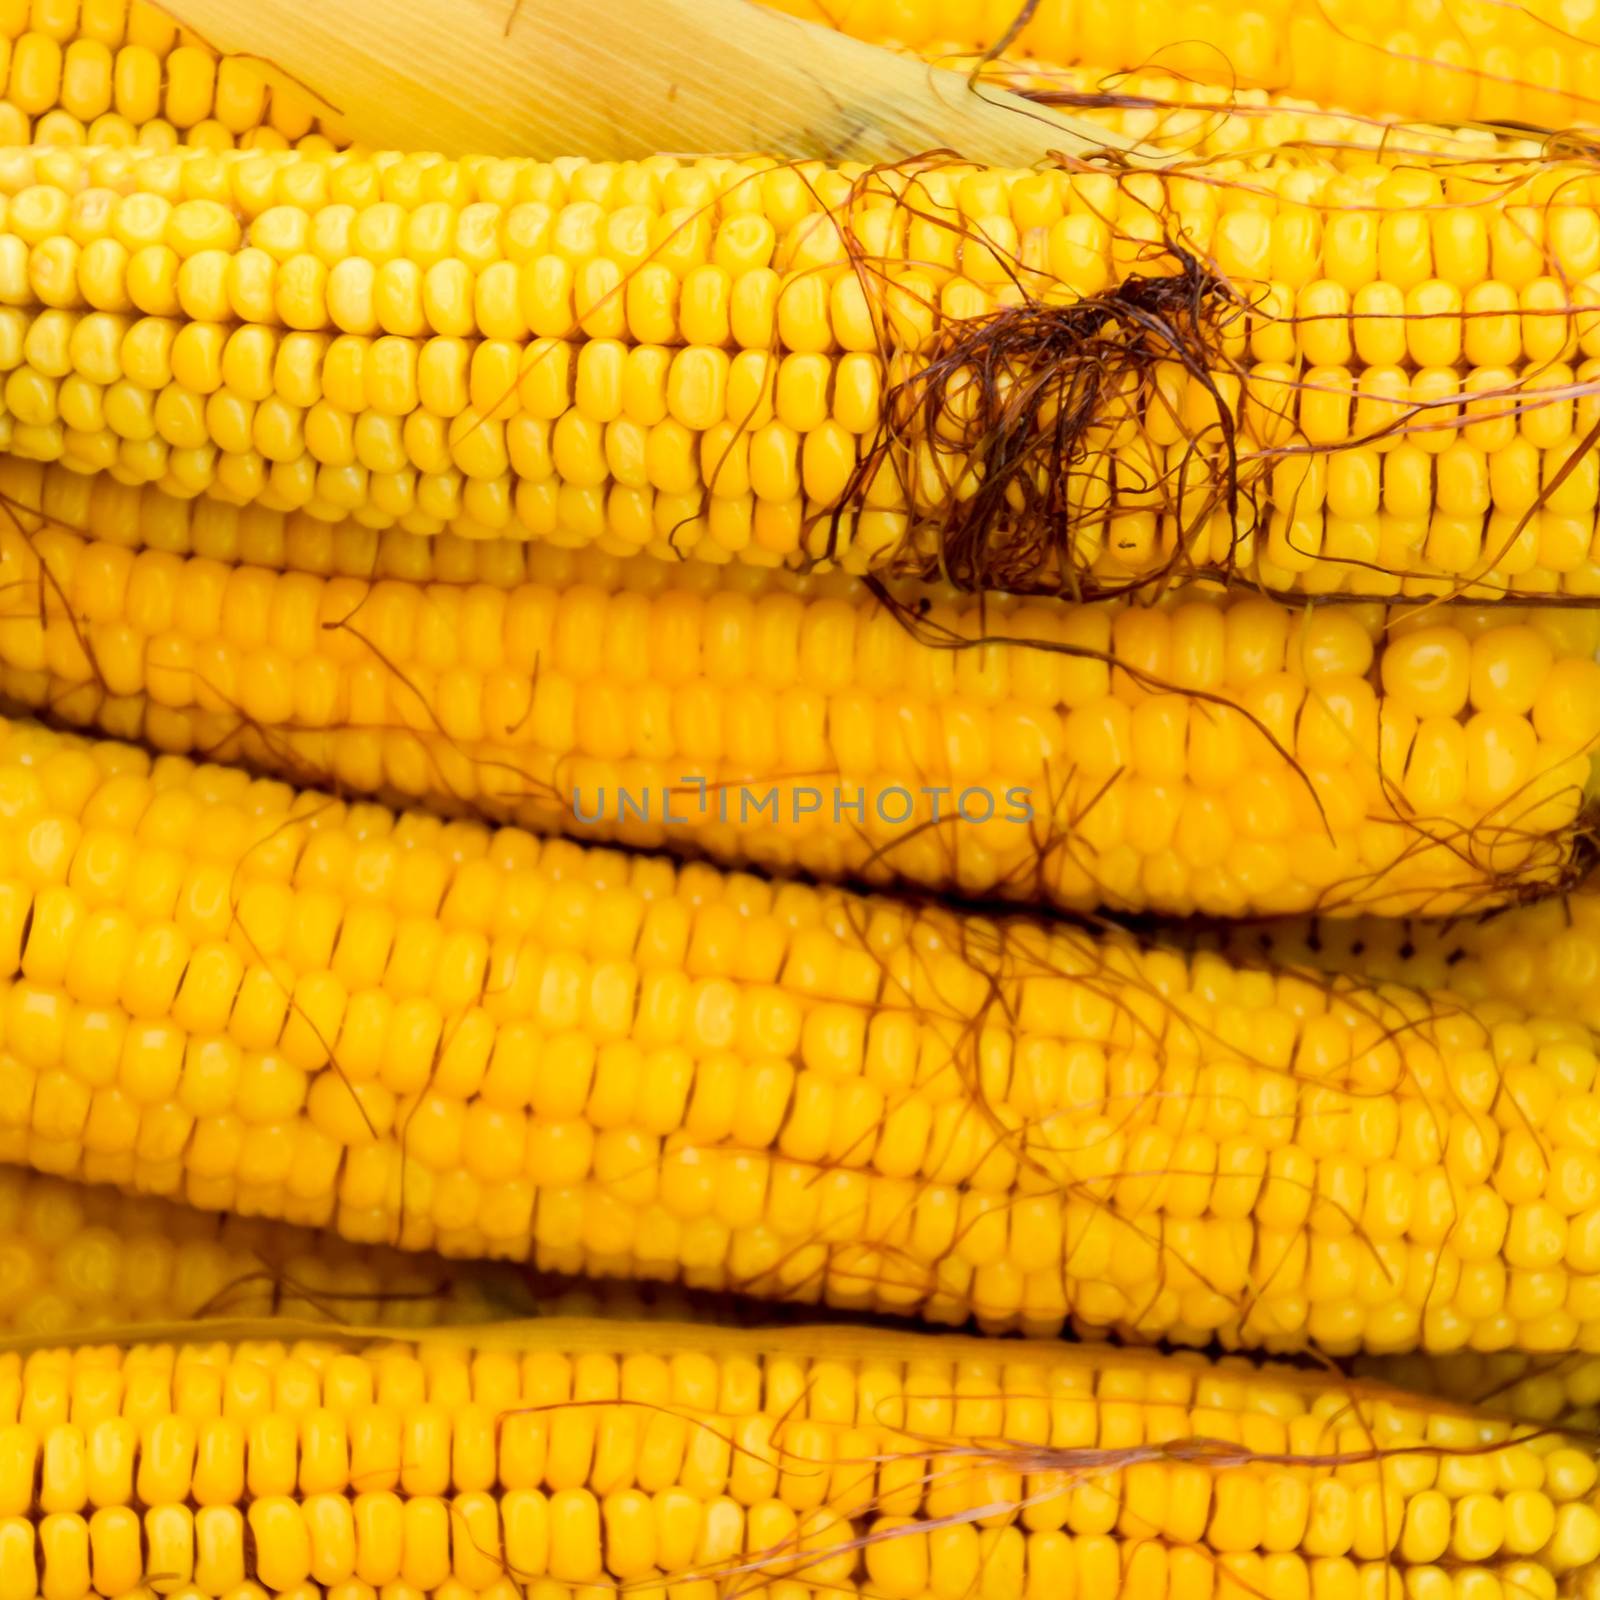 Boiled corn on an aluminum tray. Corn near. Closeup of corn. Yellow boiled young corn, useful and tasty food